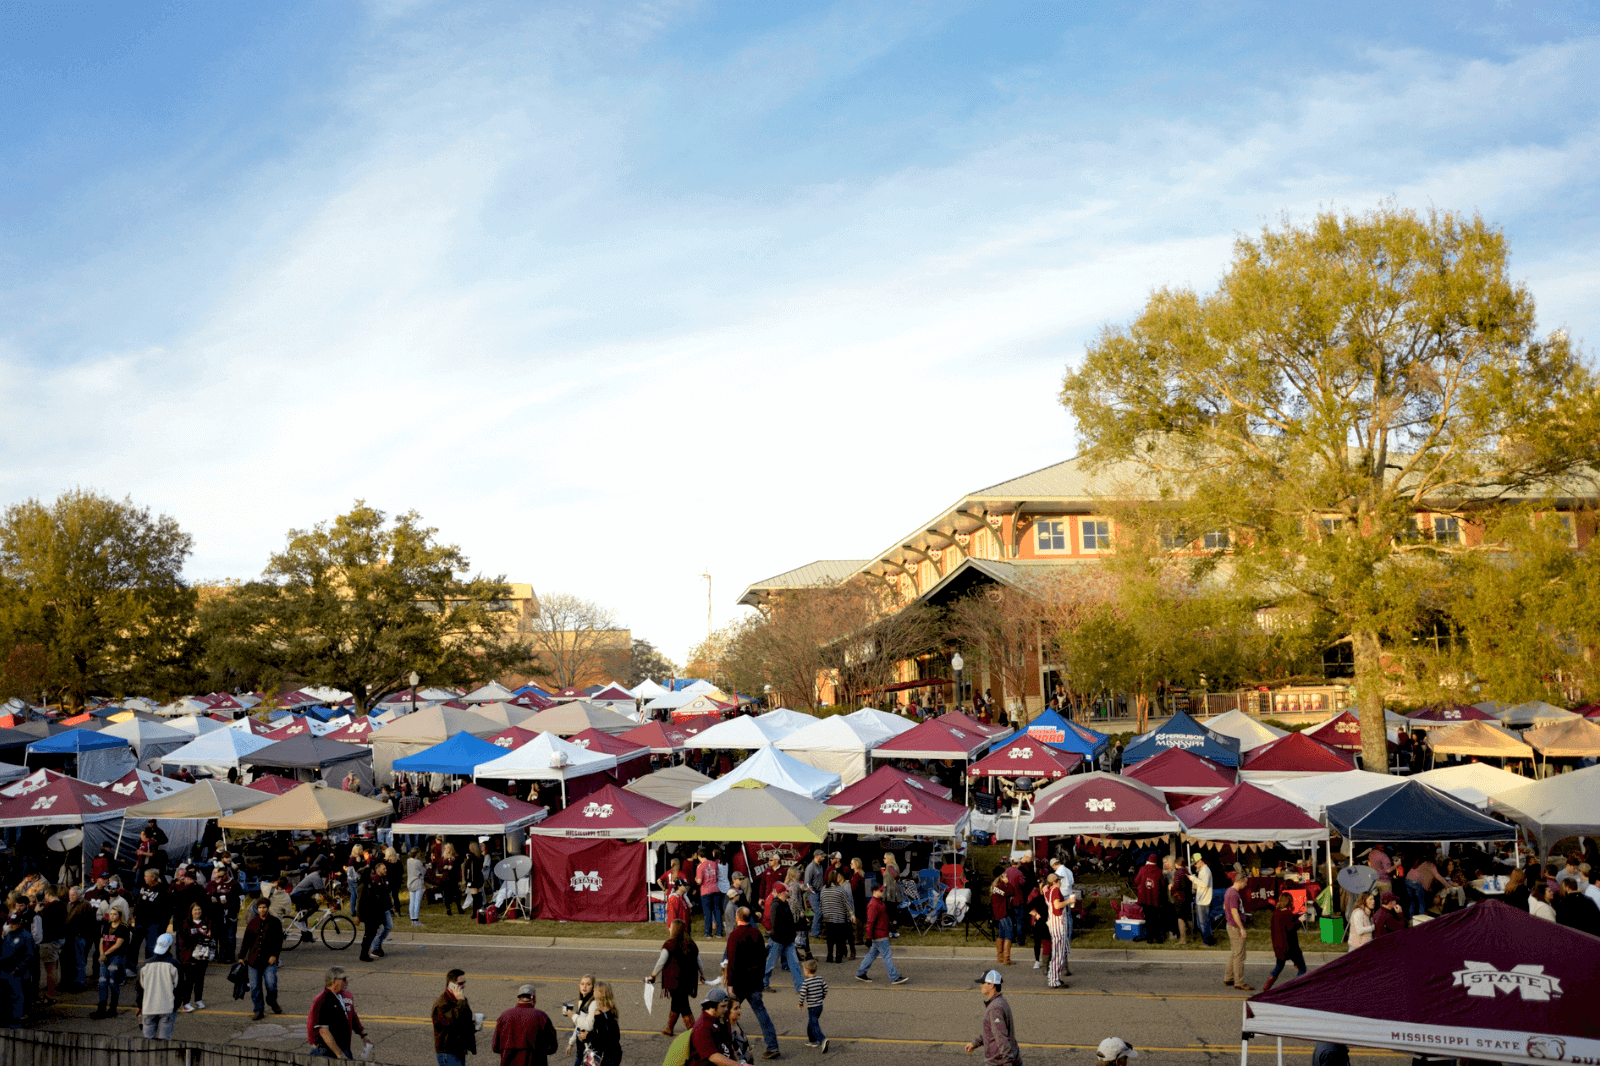 Your SEC All-City Guide: Where to Eat, Sleep & Tailgate